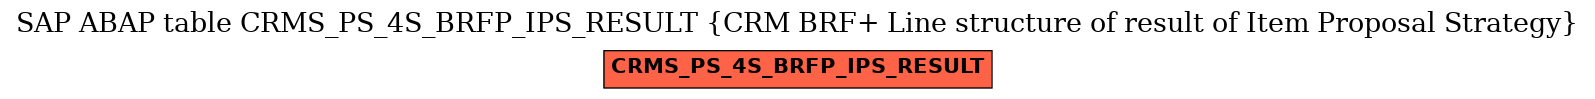 E-R Diagram for table CRMS_PS_4S_BRFP_IPS_RESULT (CRM BRF+ Line structure of result of Item Proposal Strategy)